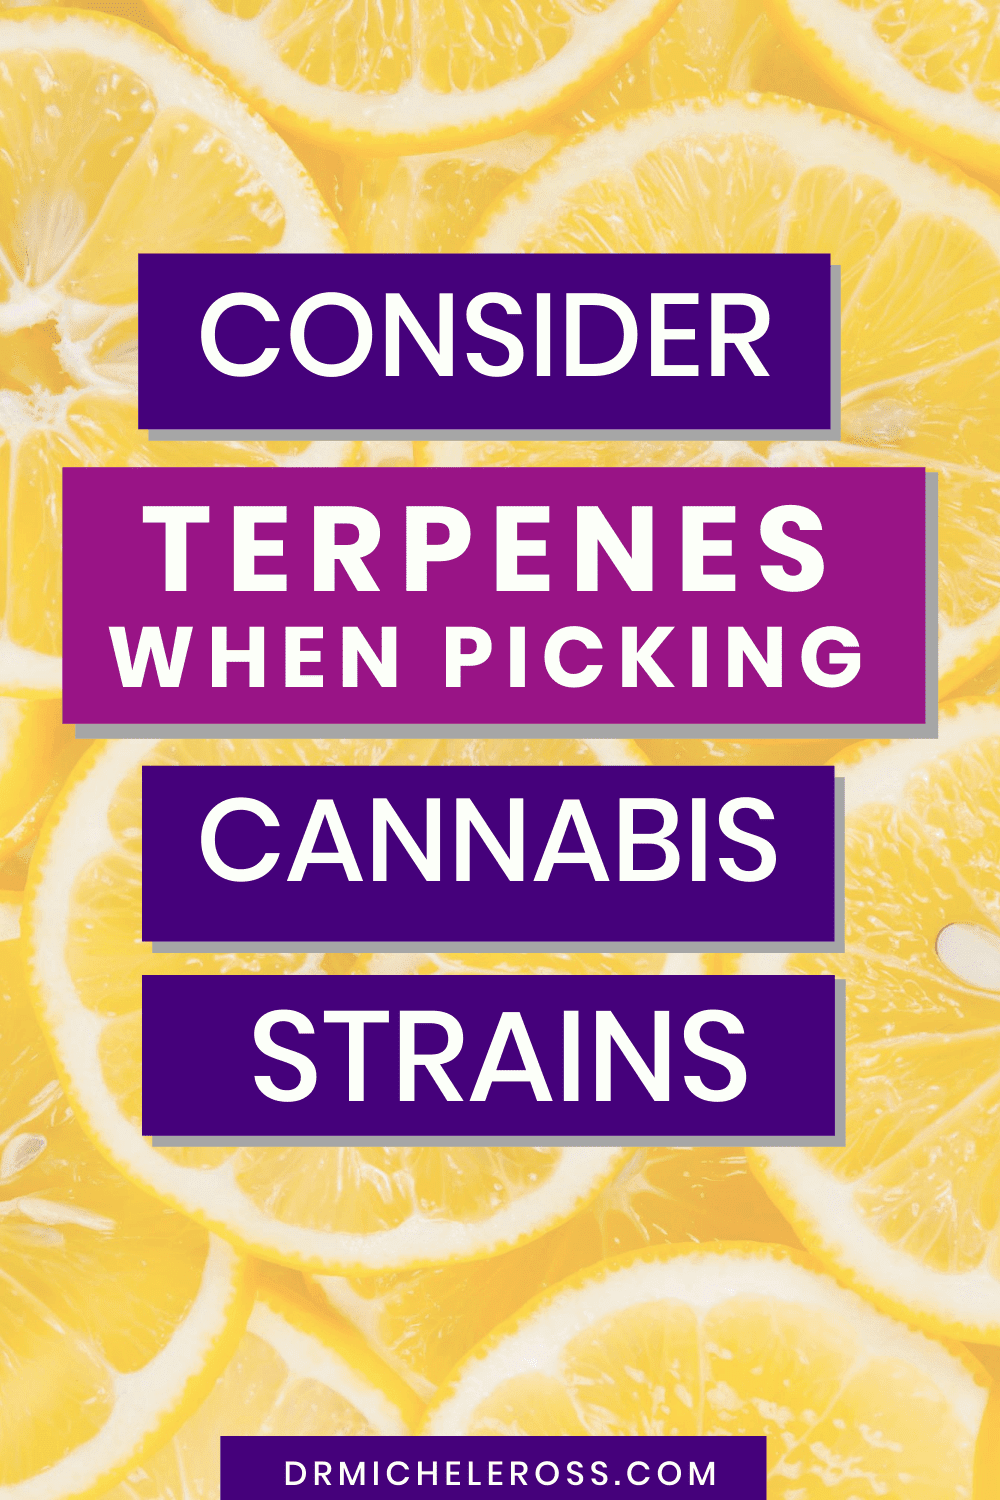 terpenes provide smell and flavor in weed cannabis strains